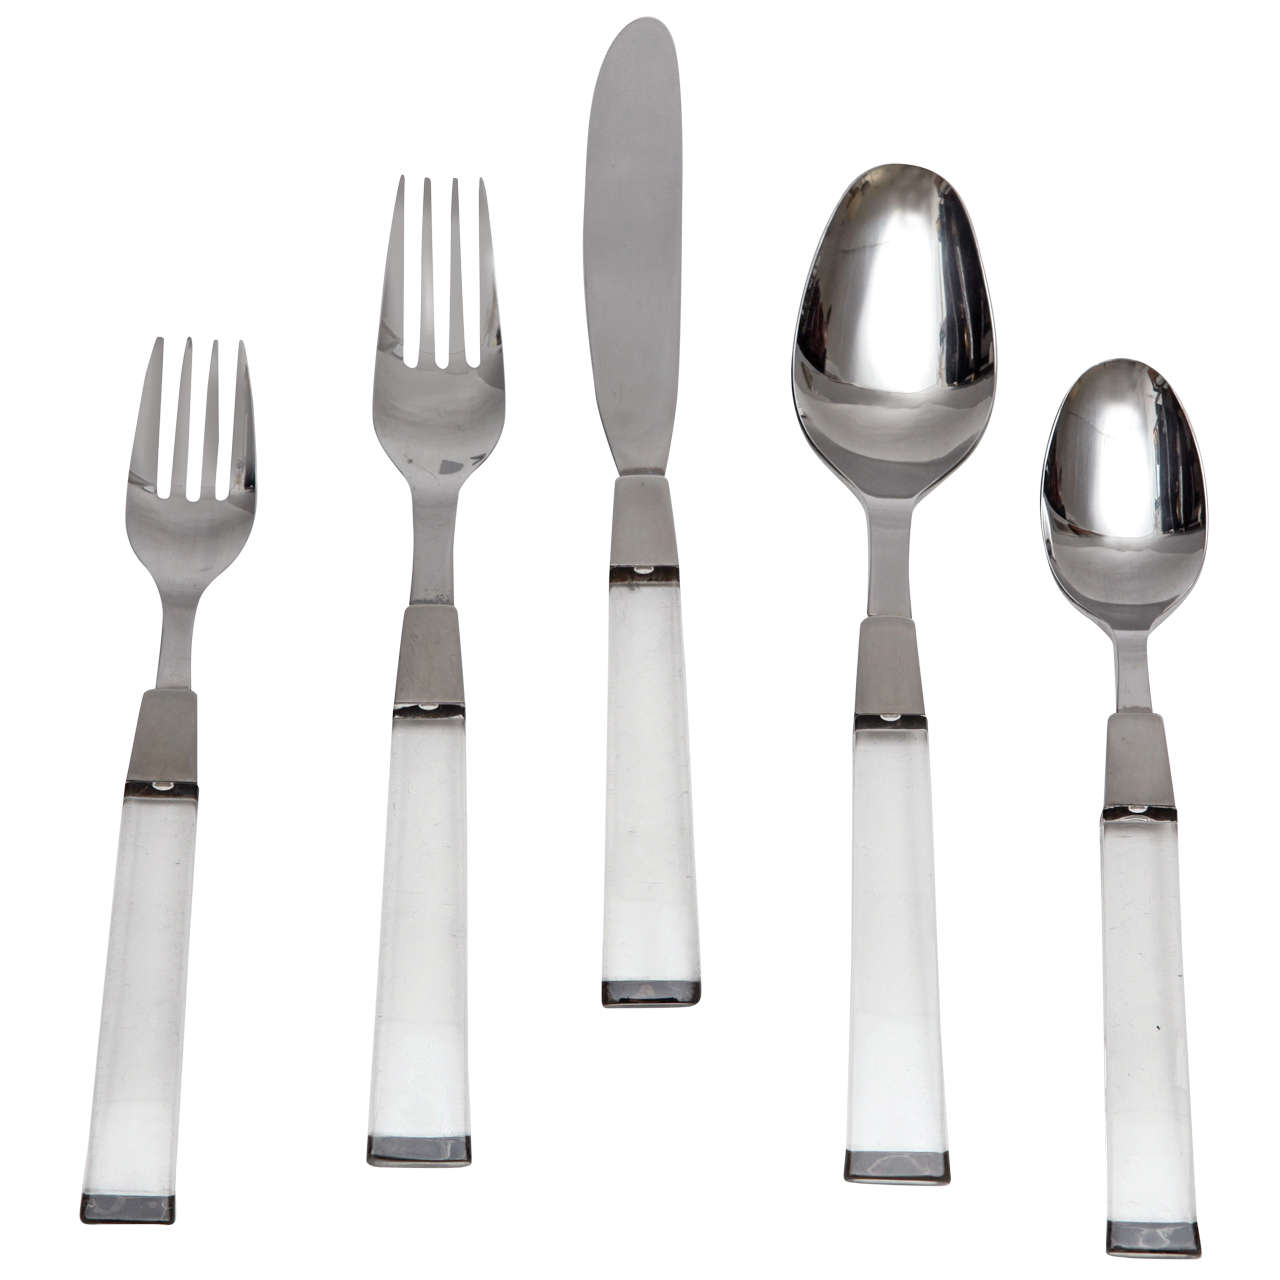 Lucite Handled Stainless Steel Flatware, Service for Sixteen